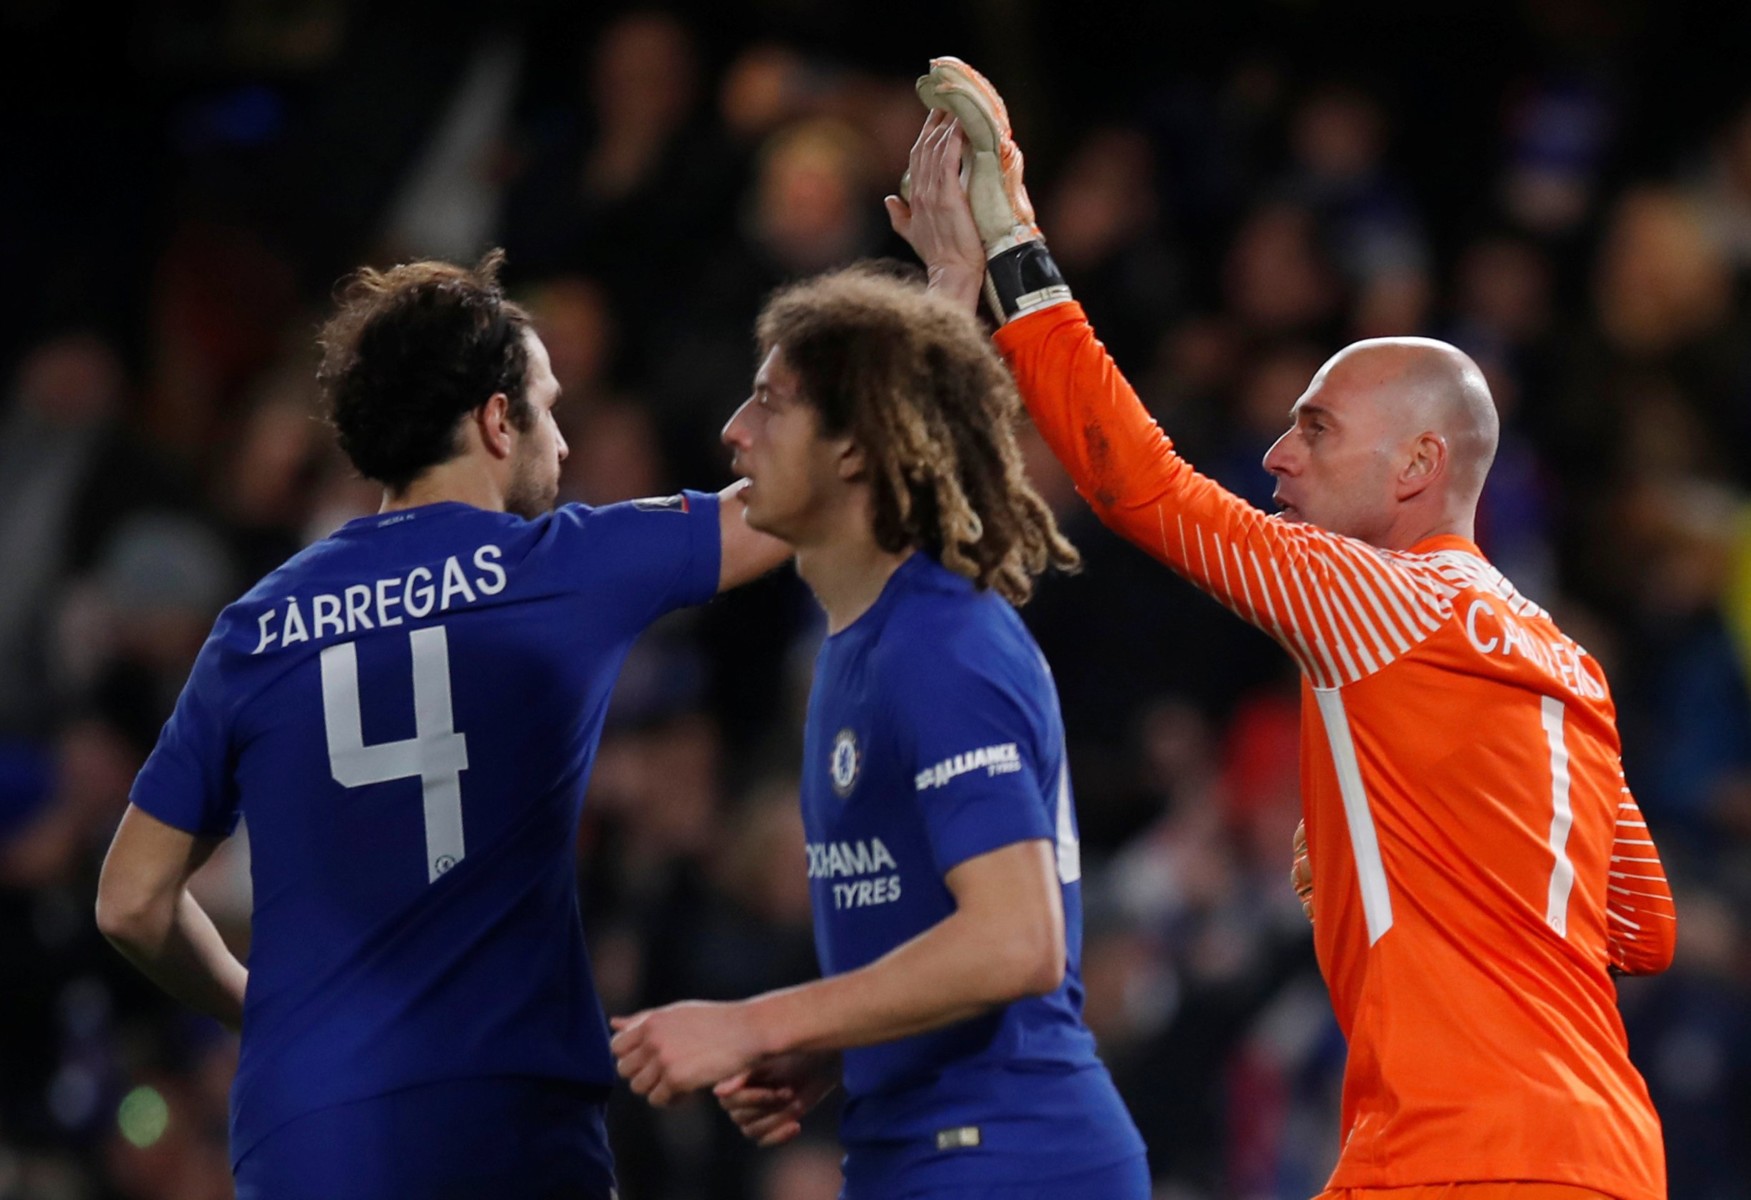 Fabregas took to Twitter to tell a hilarious story about Willy Caballero